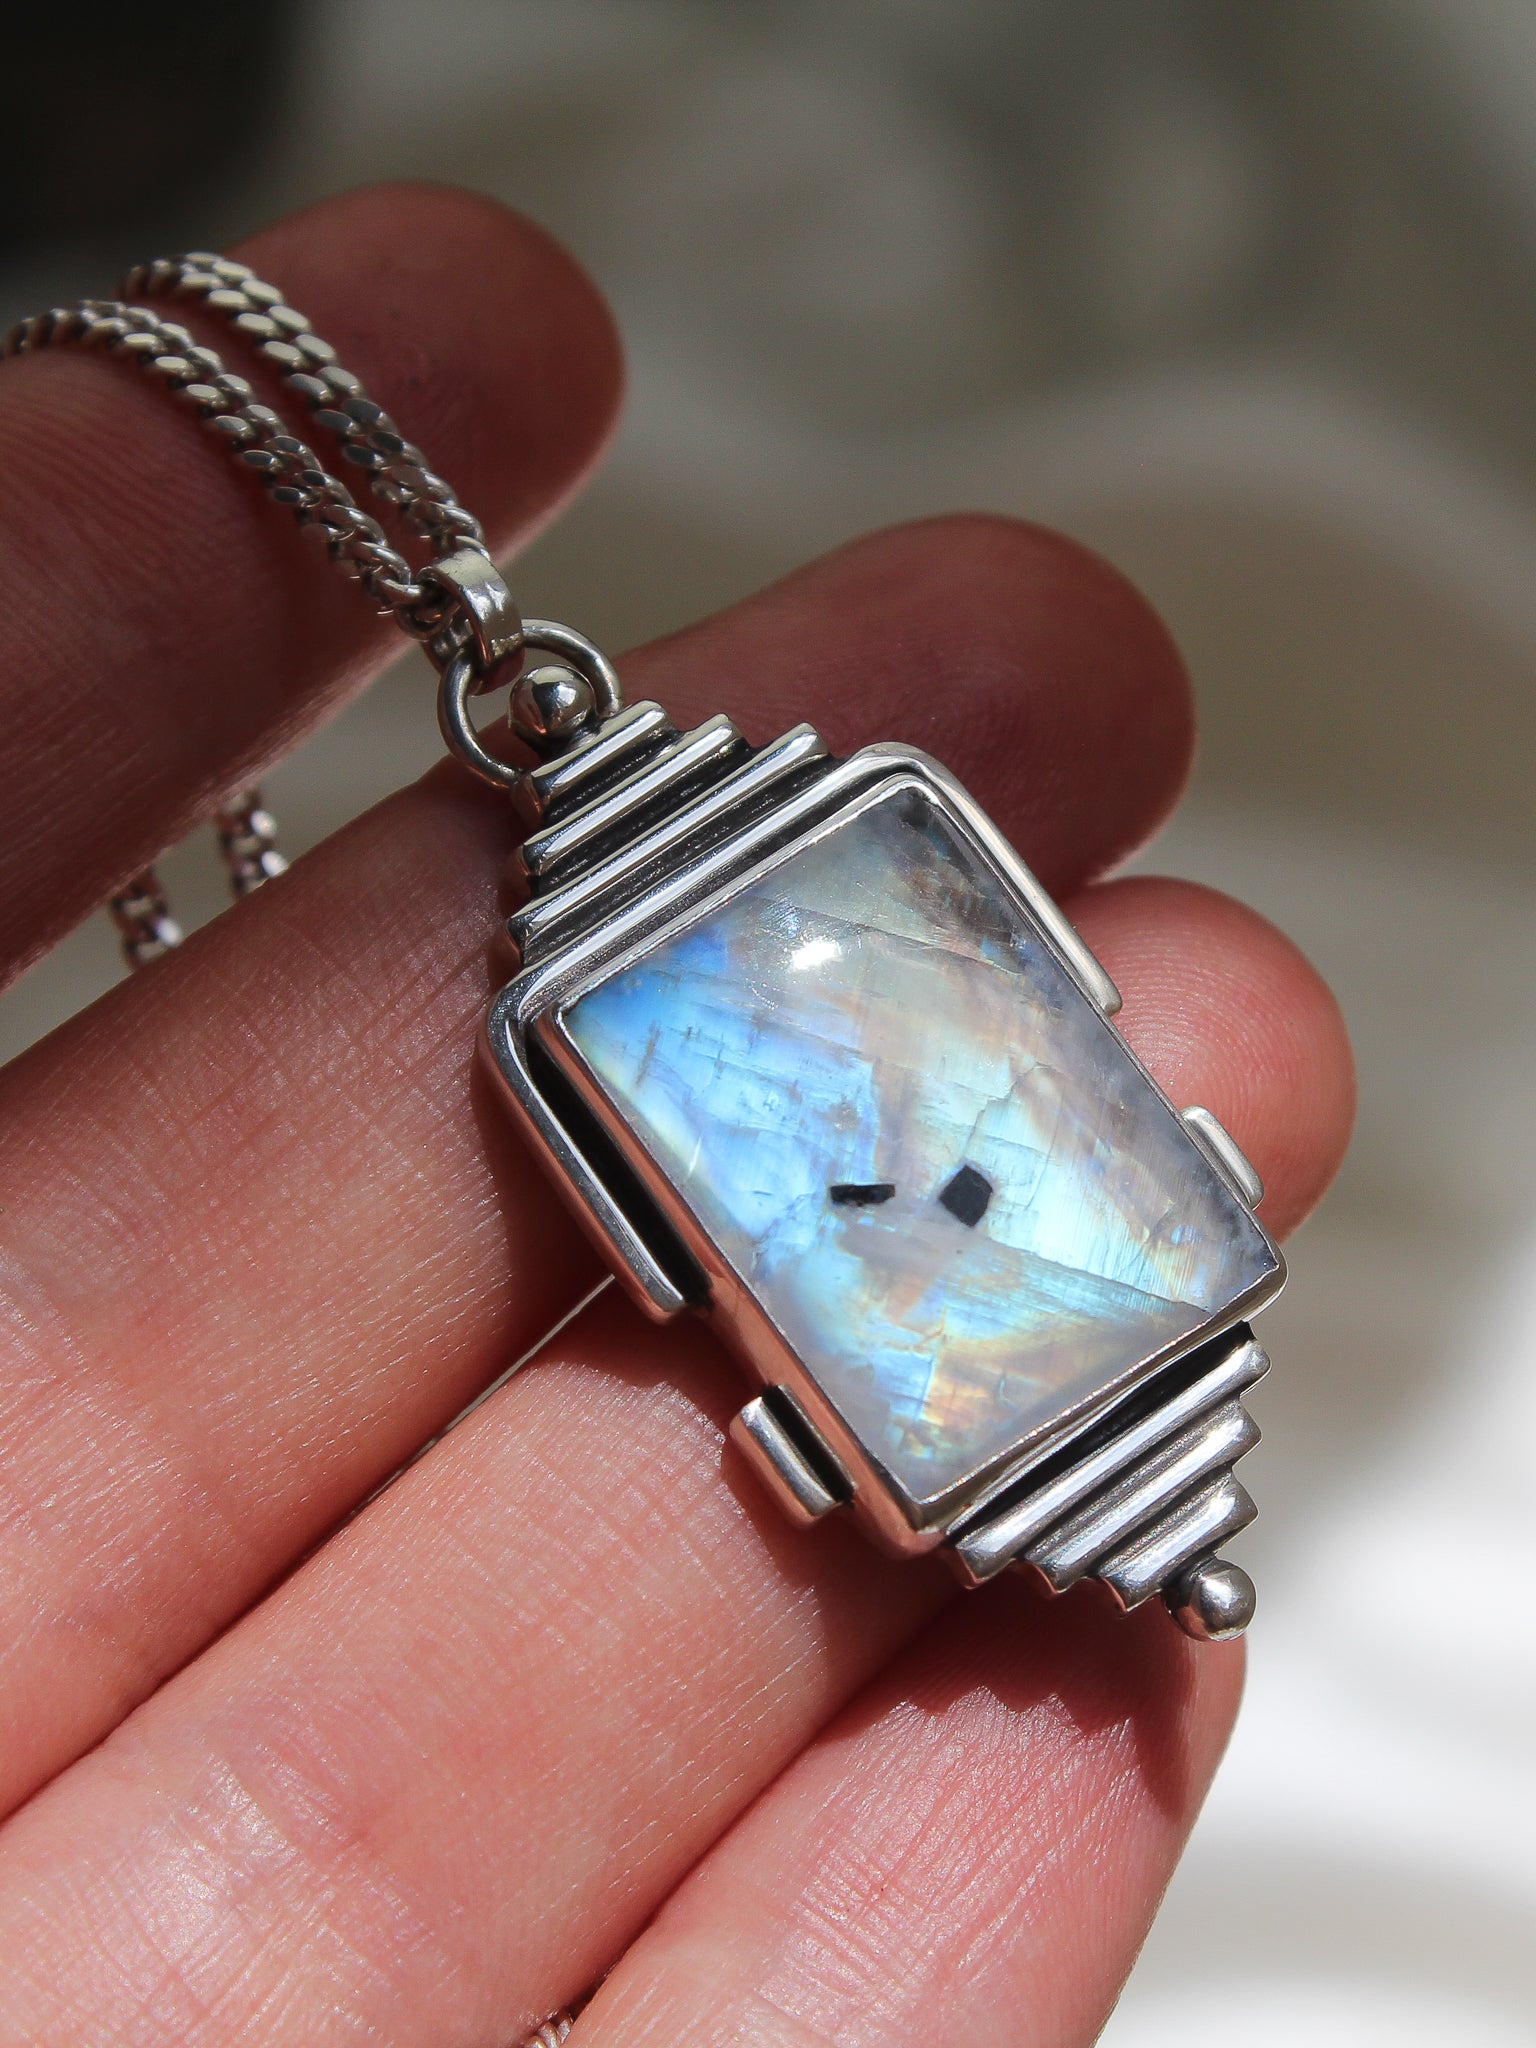 Handmade 925 sterling silver pendant with flashy rainbow moonstone lily and William jewelry